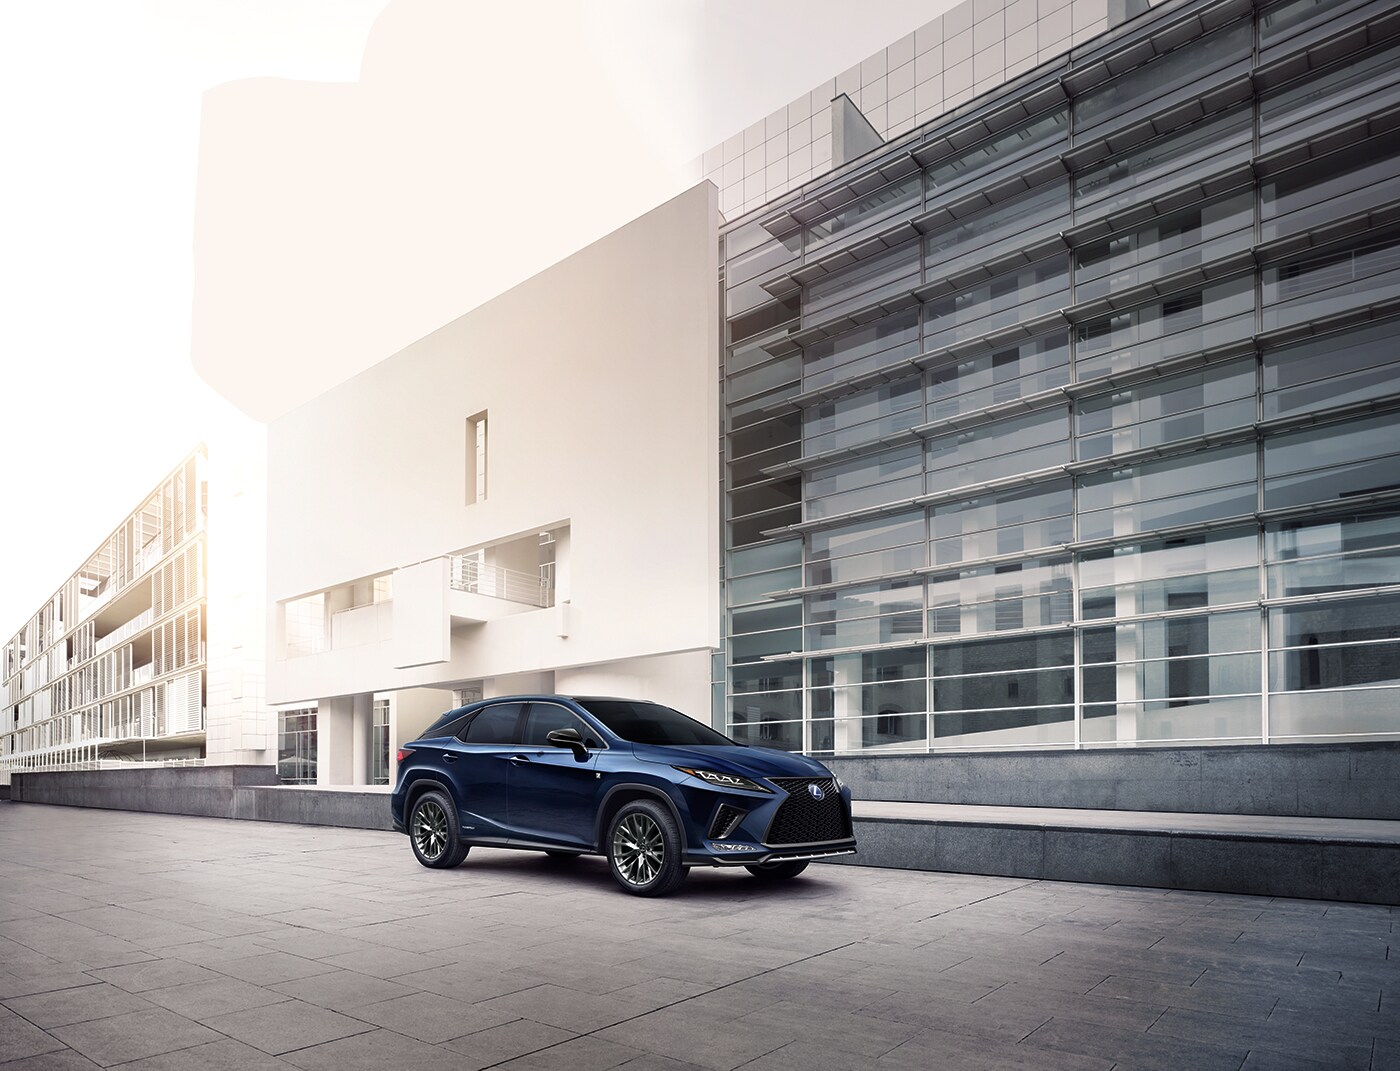 Compare the 2020 Lexus RX and the 2020 Acura MDX at Bobby Rahal Lexus of Lewistown | Blue 2020 Lexus RX parked outside a building